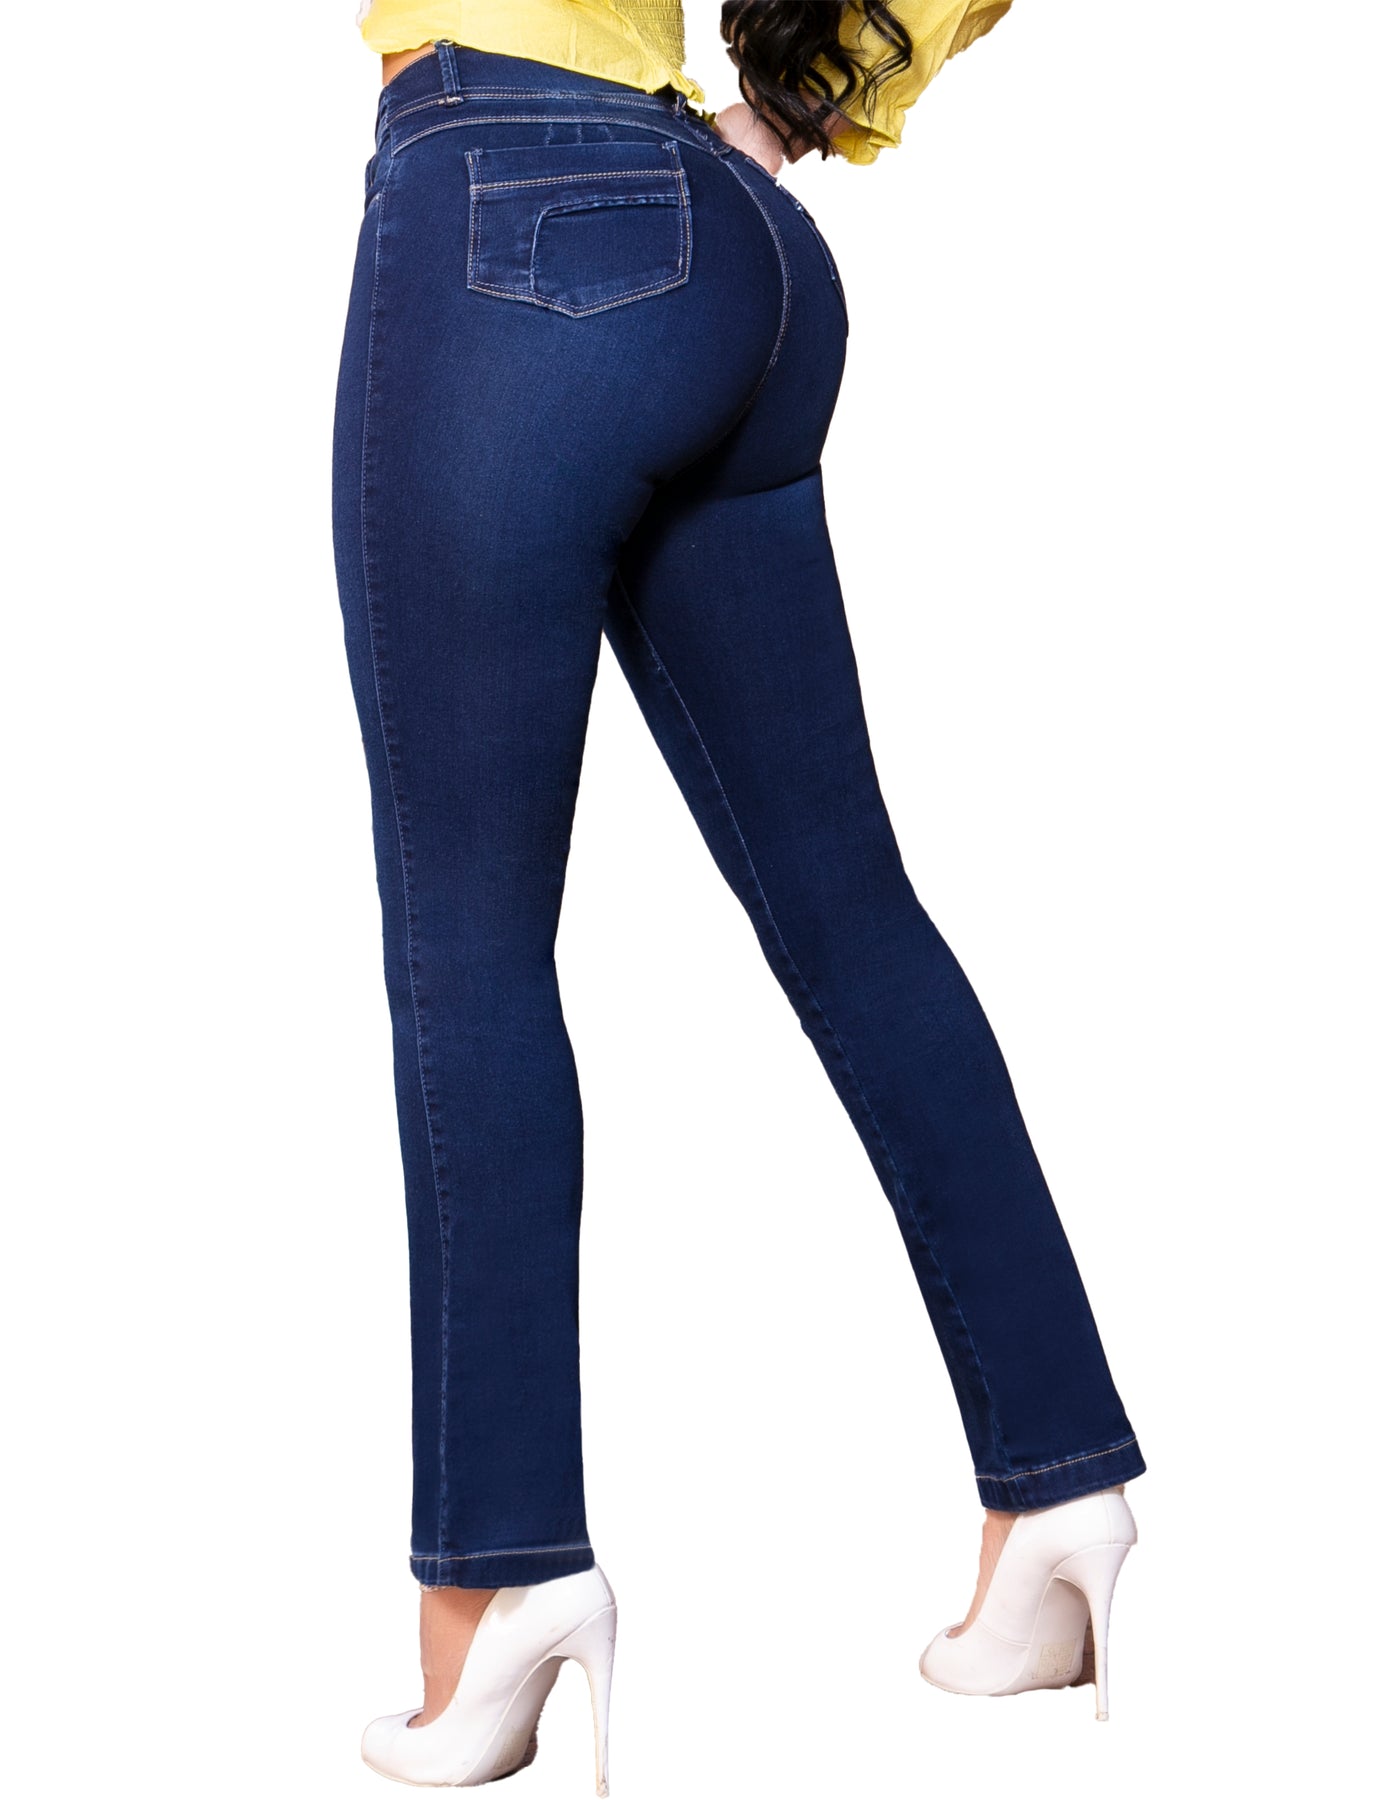 Colombian Butt Lifting Jean Melisa women high waist waisted mujer levanta  lift colombianos denim cola blue pants stretch pantalones booty plus PUSH  UP rise lifter colombiano pant stretchy alta pantalon shaping –